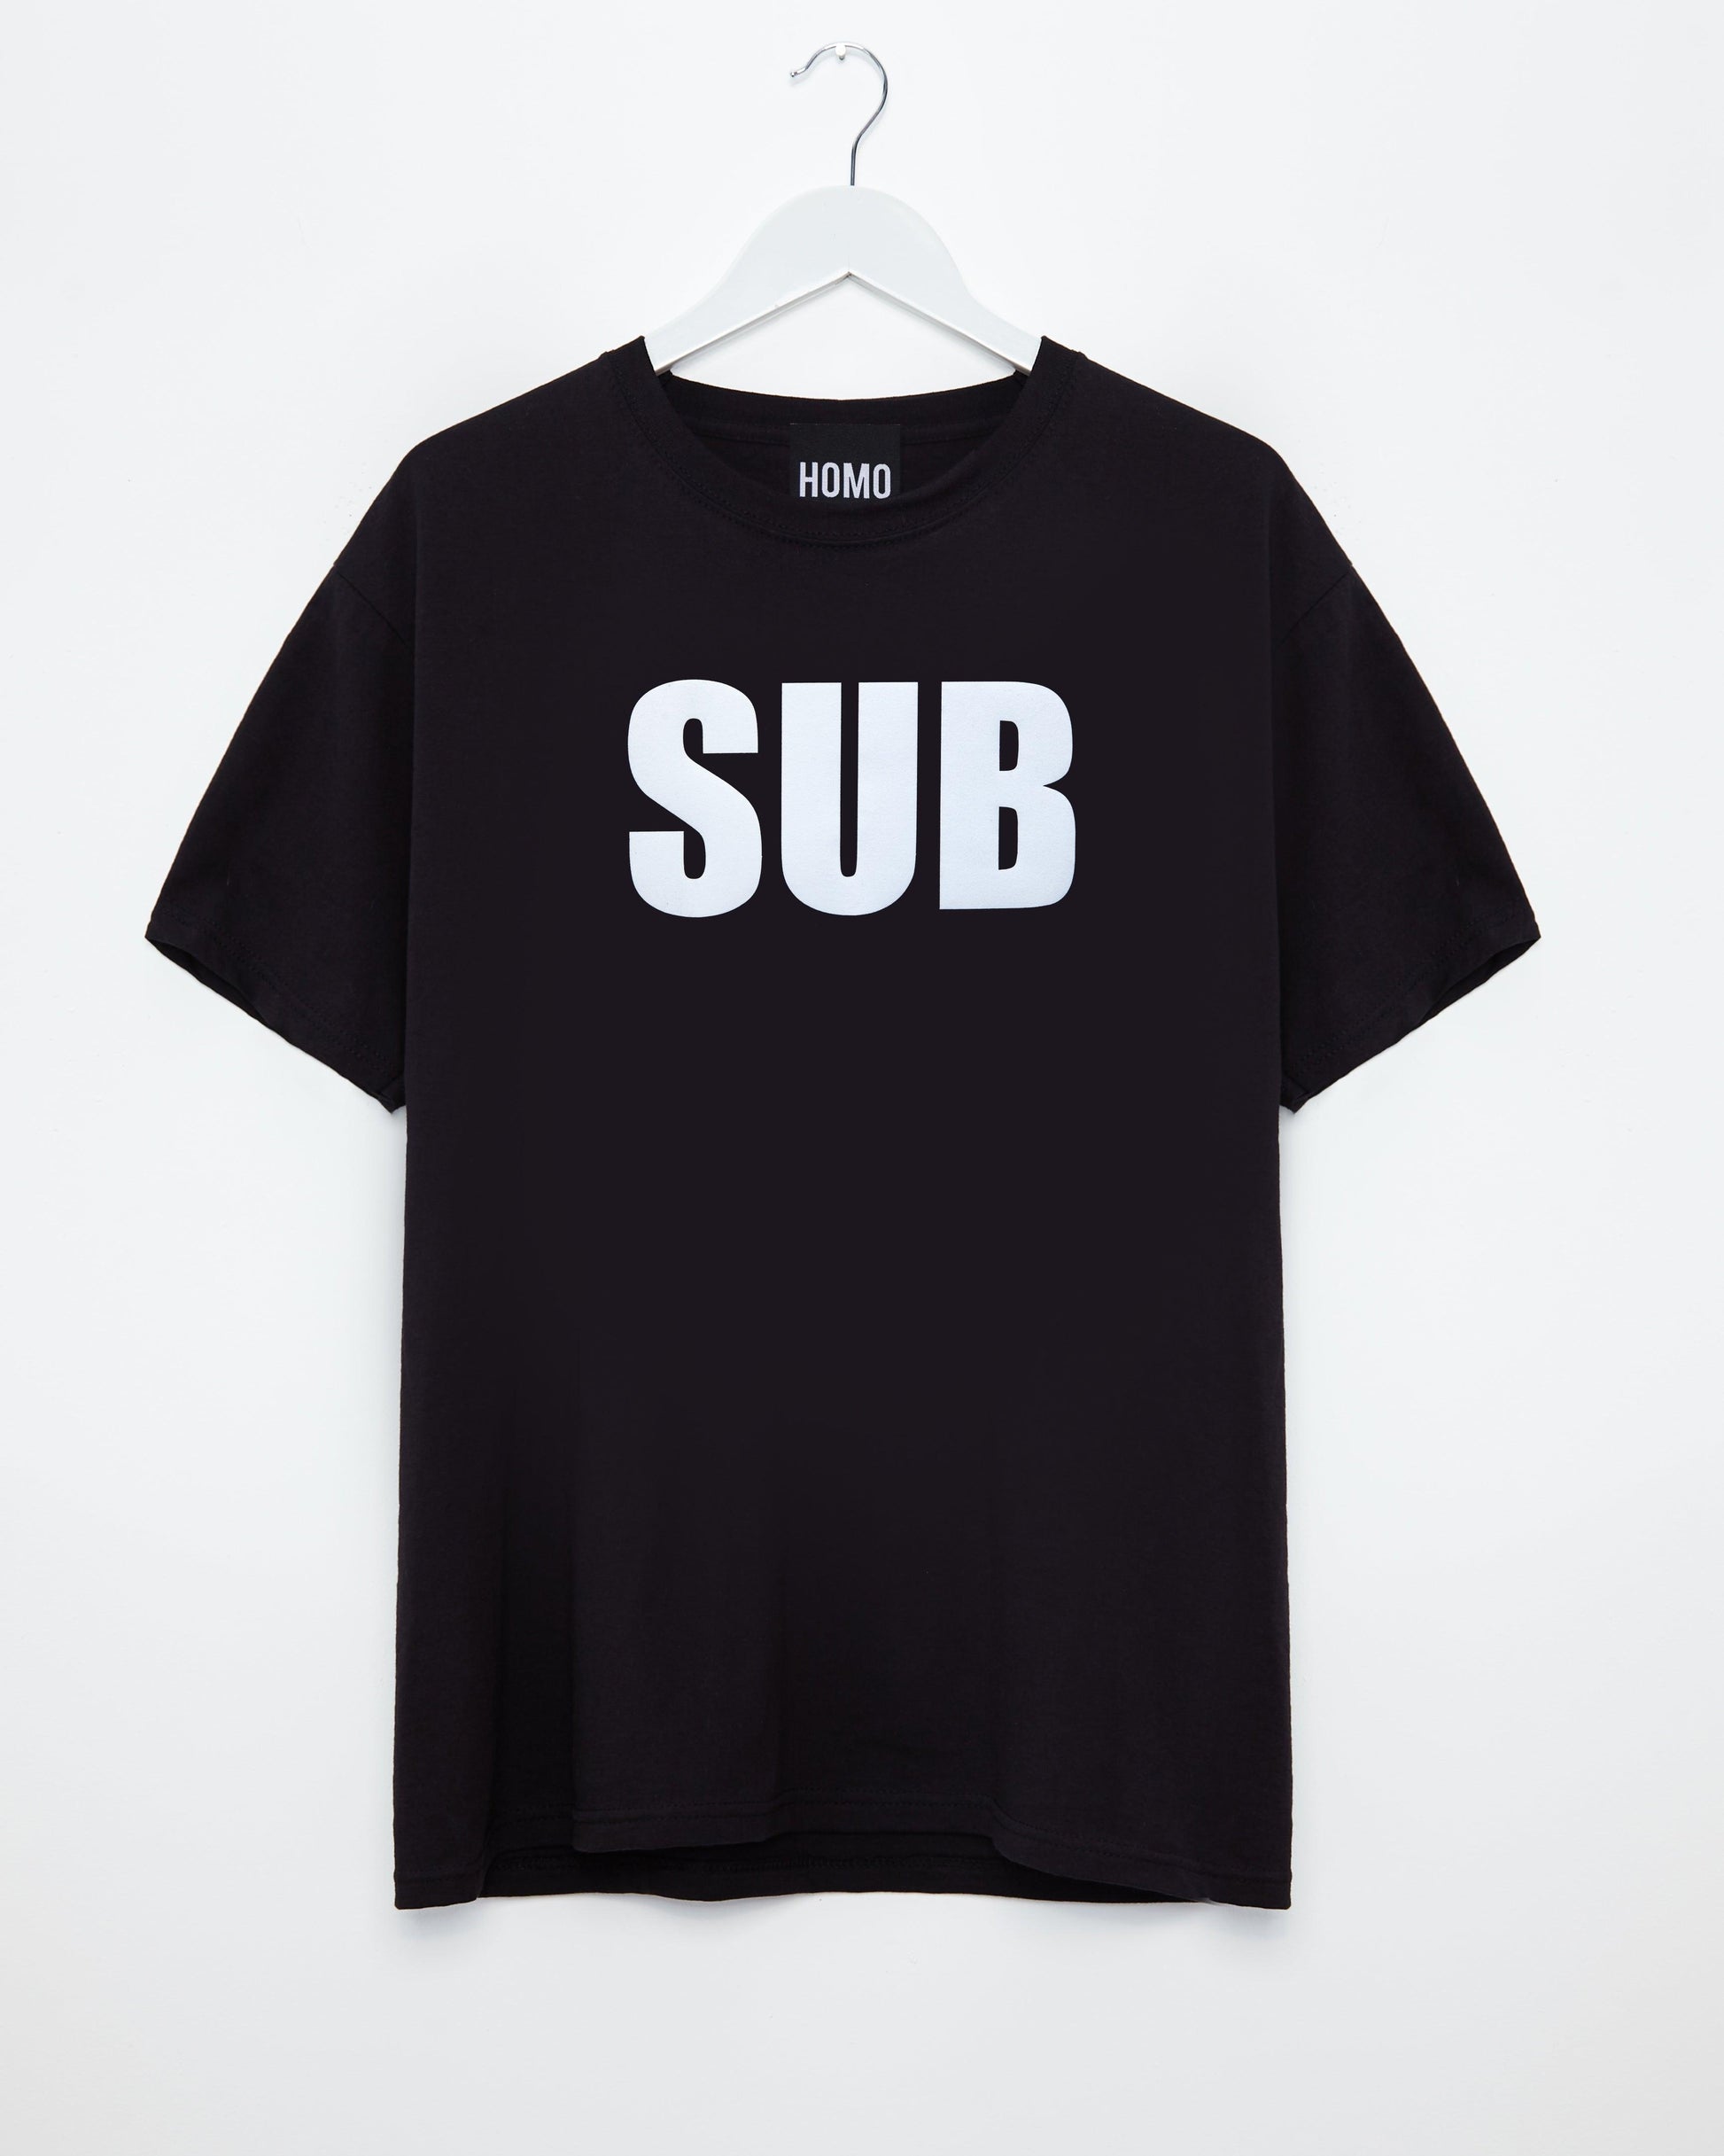 Explore Your Submissive Side with SUB: White Flock Print on Black Men's Tshirt - HOMOLONDON